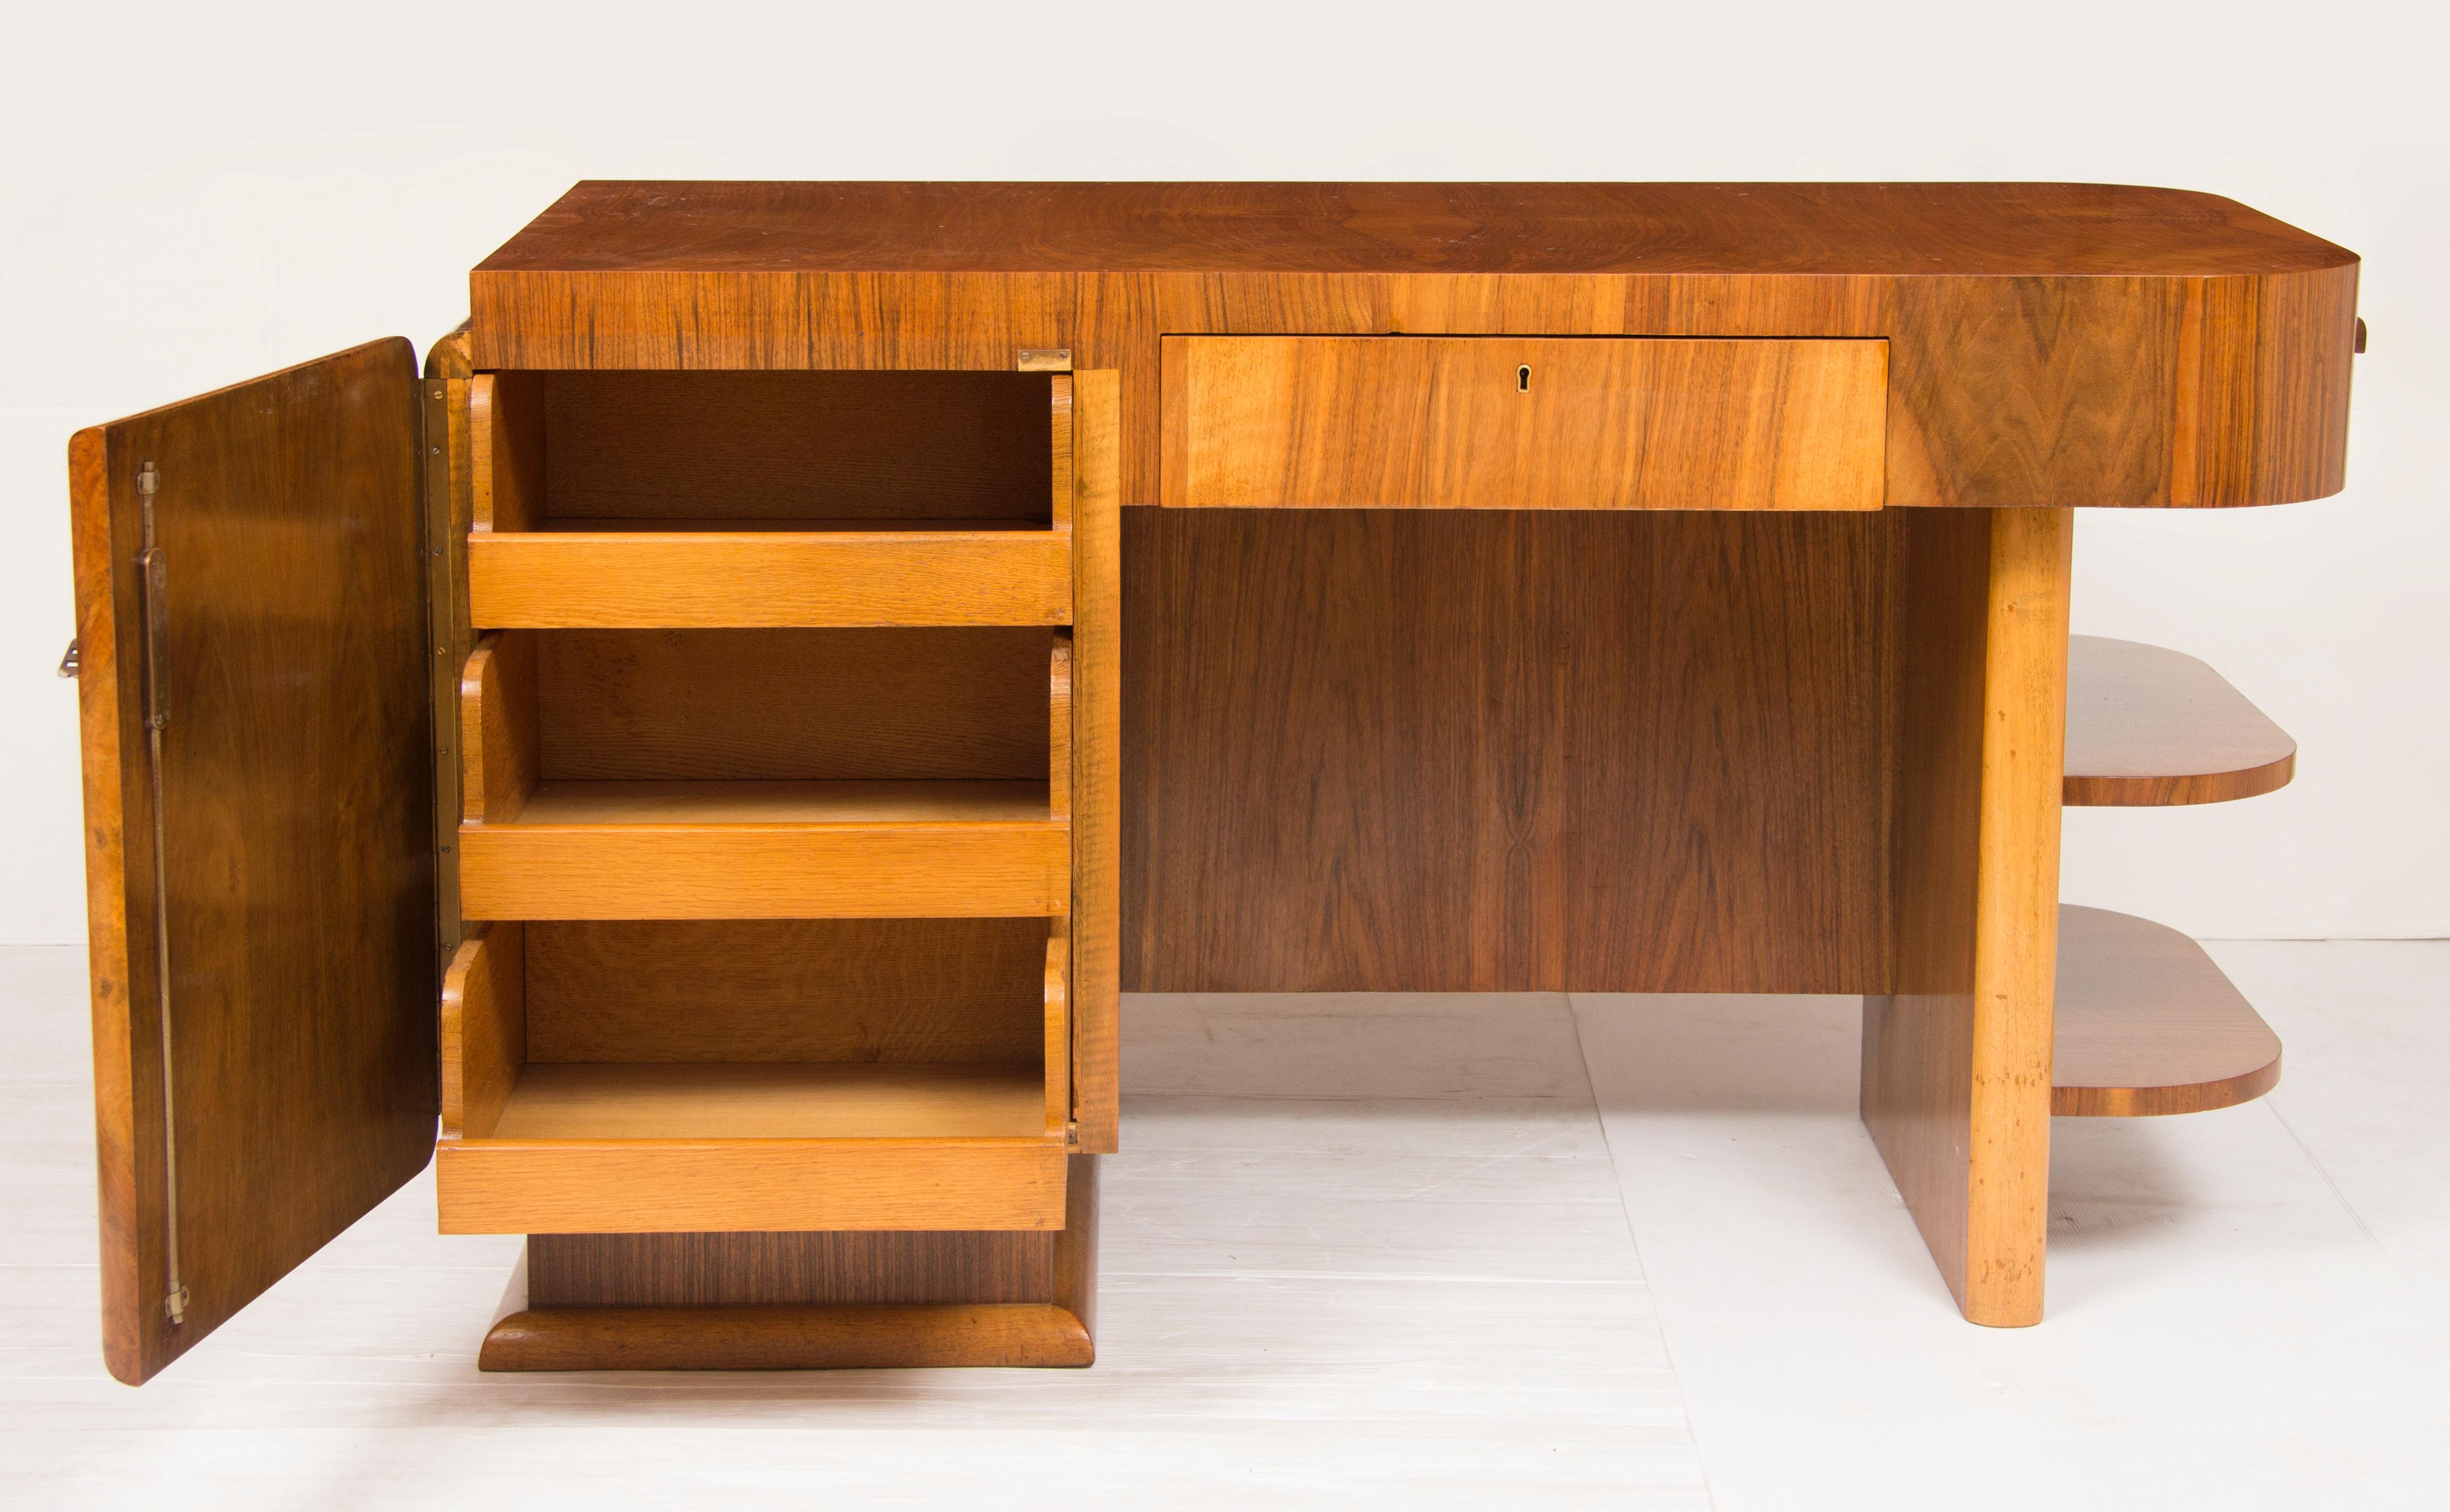 Impressive Art Deco Desk with bookshelf surround finished in figured walnut, beautiful curved edges to this well crafted Art Deco executive desk.
Additional pull out shelf to the right side
Measures: H 78 cm, W 137 cm, D 75 cm
British, circa 1930.